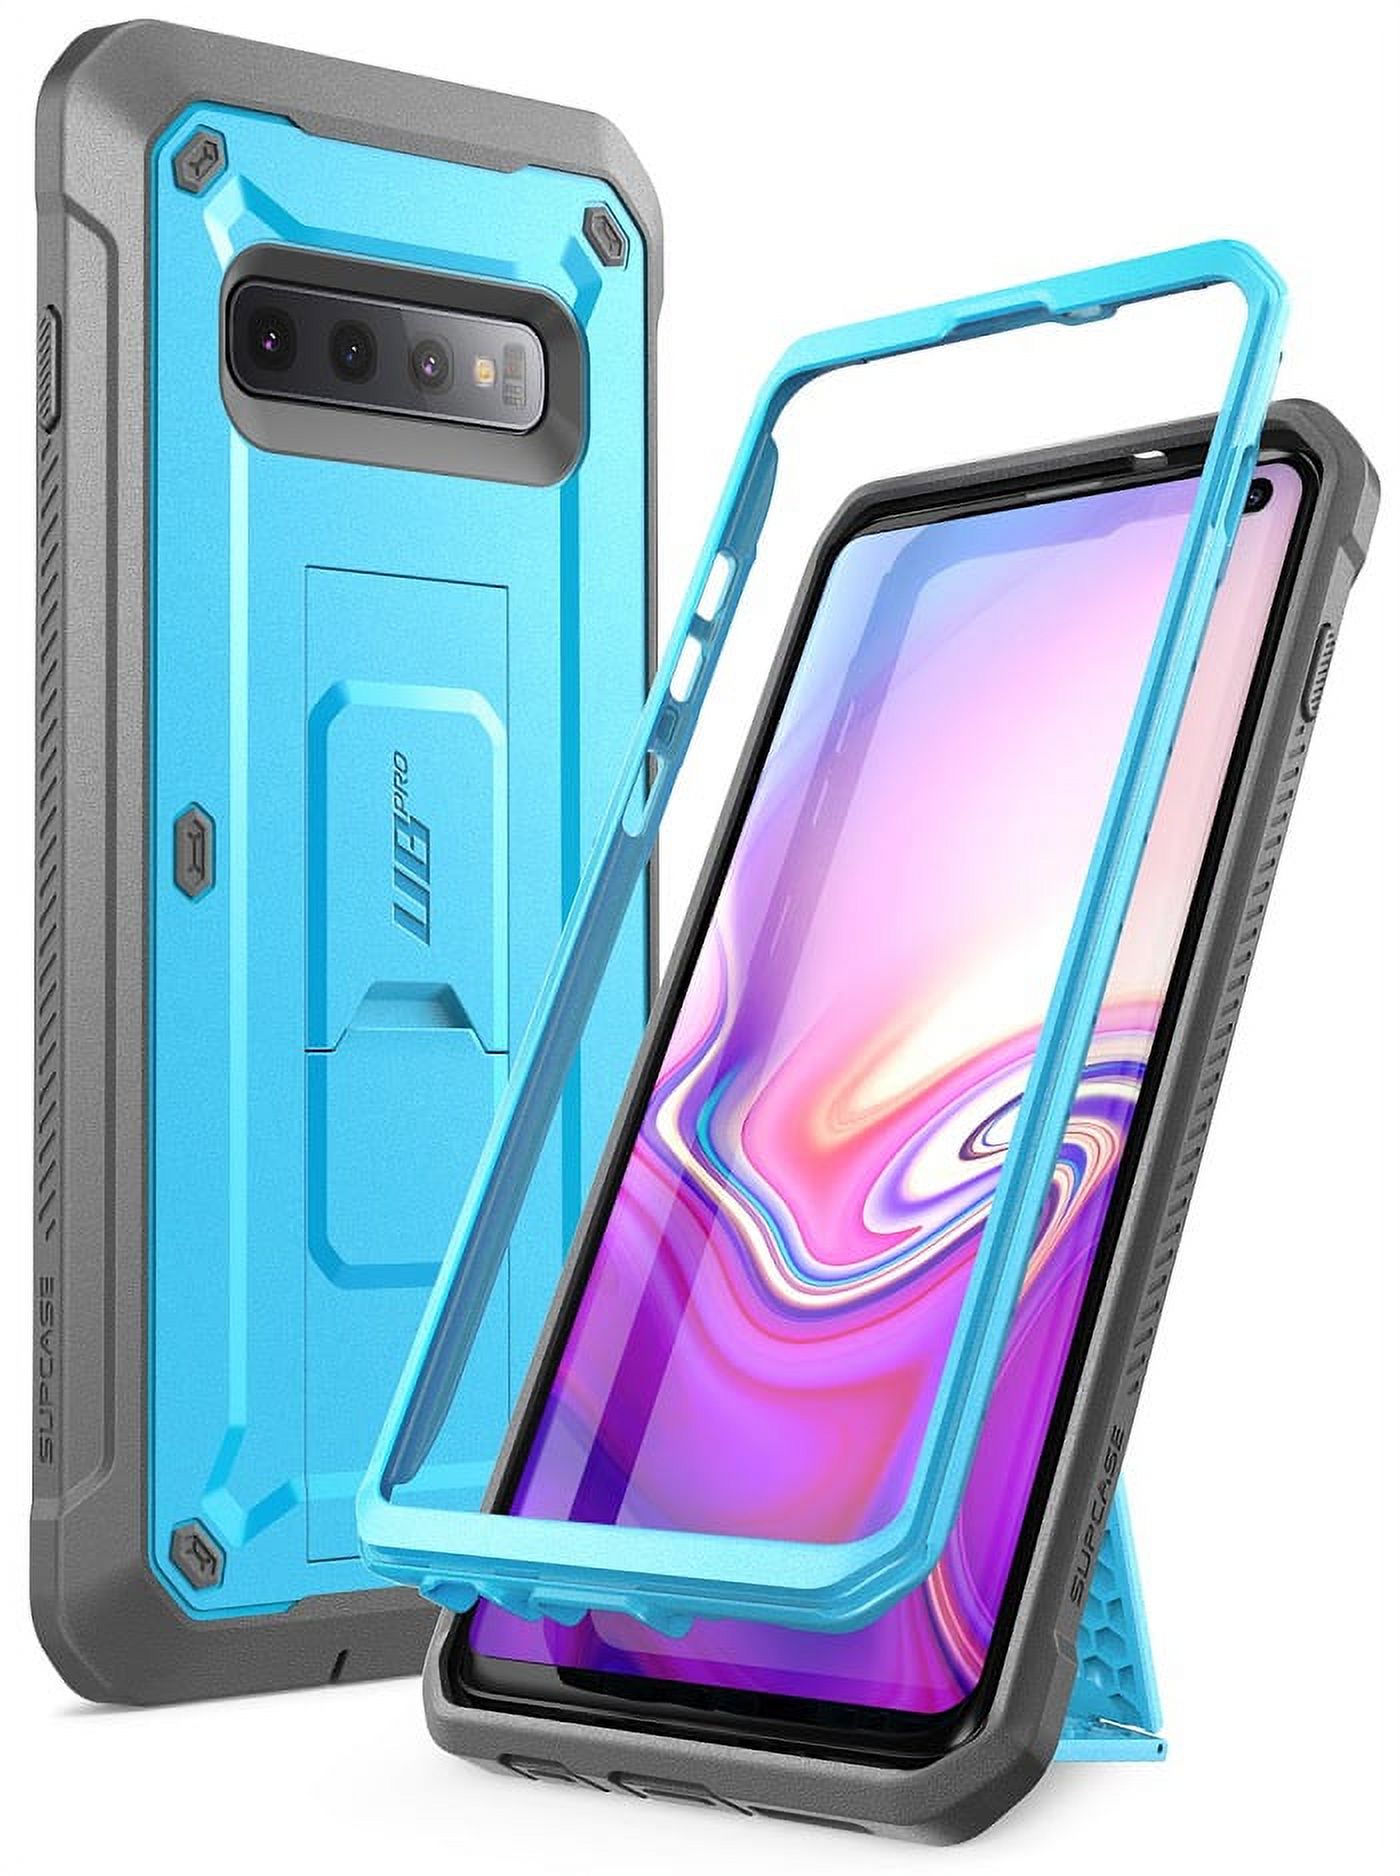 Samsung Galaxy S10 Case (2019 Release) SUPCASE Unicorn Beetle Pro Series Full-Body Dual Layer Rugged with Holster & Kickstand Without Built-in Screen Protector (Blue) - image 1 of 8